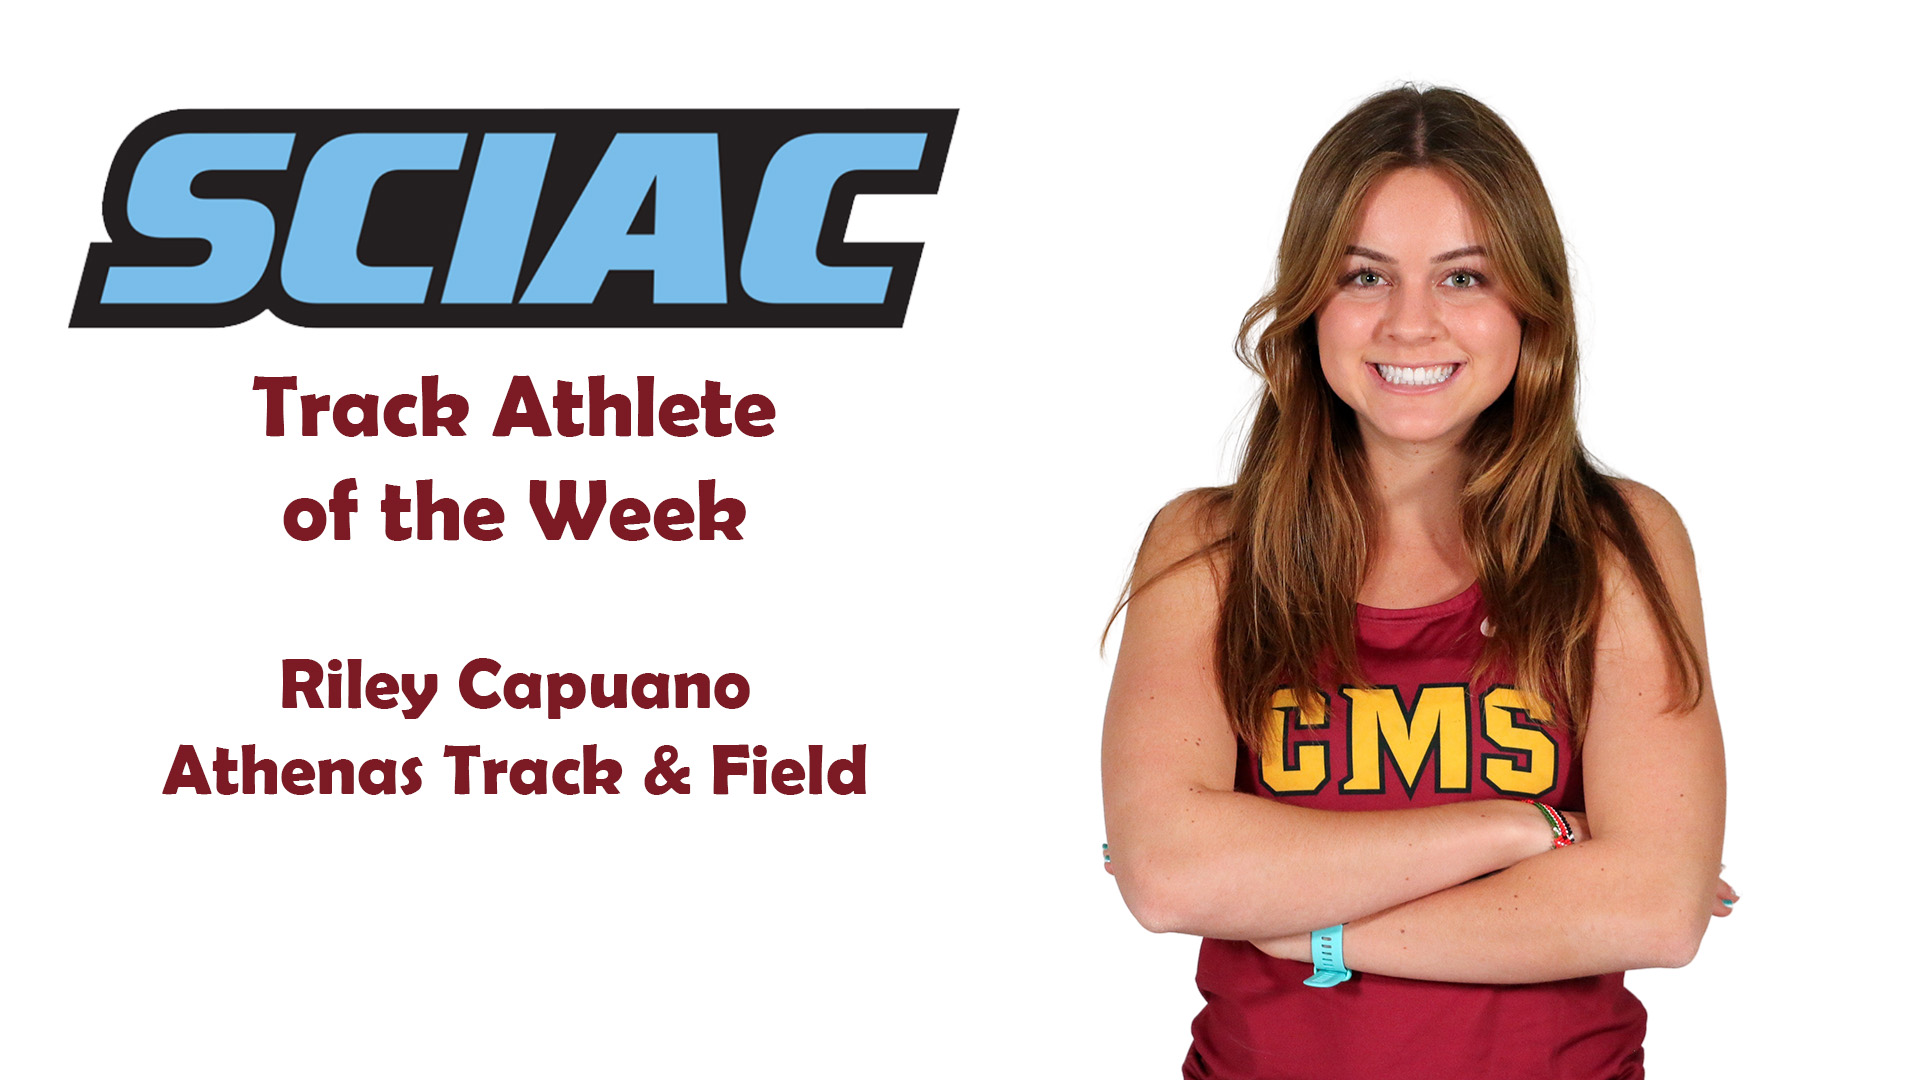 posed shot of Riley Capuano with the SCIAC logo